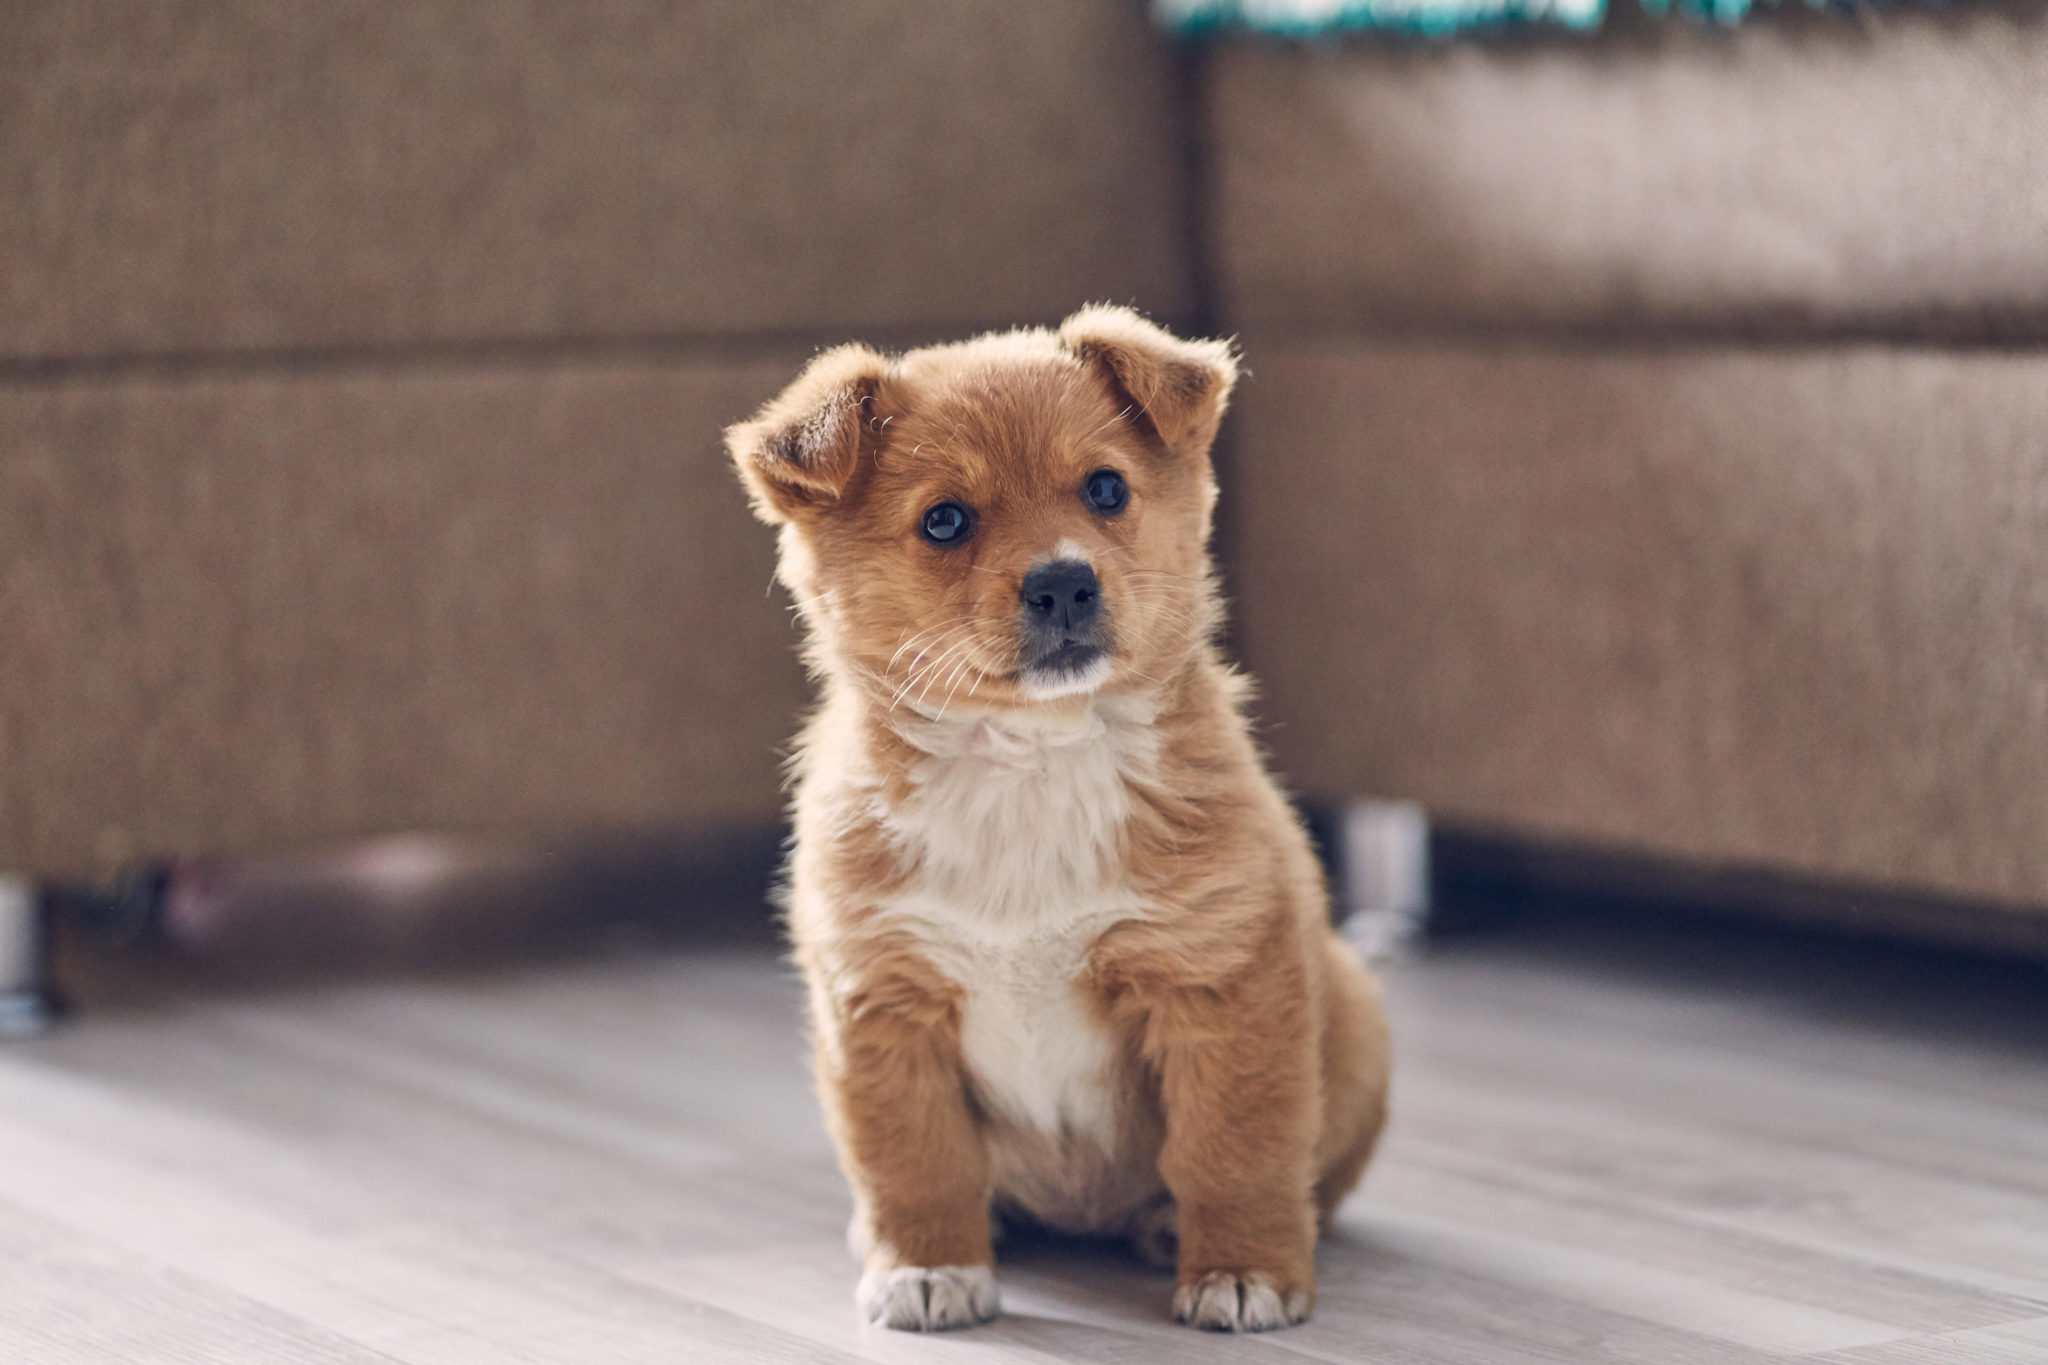 A puppy sits on the floor of an apartment in May 2019.